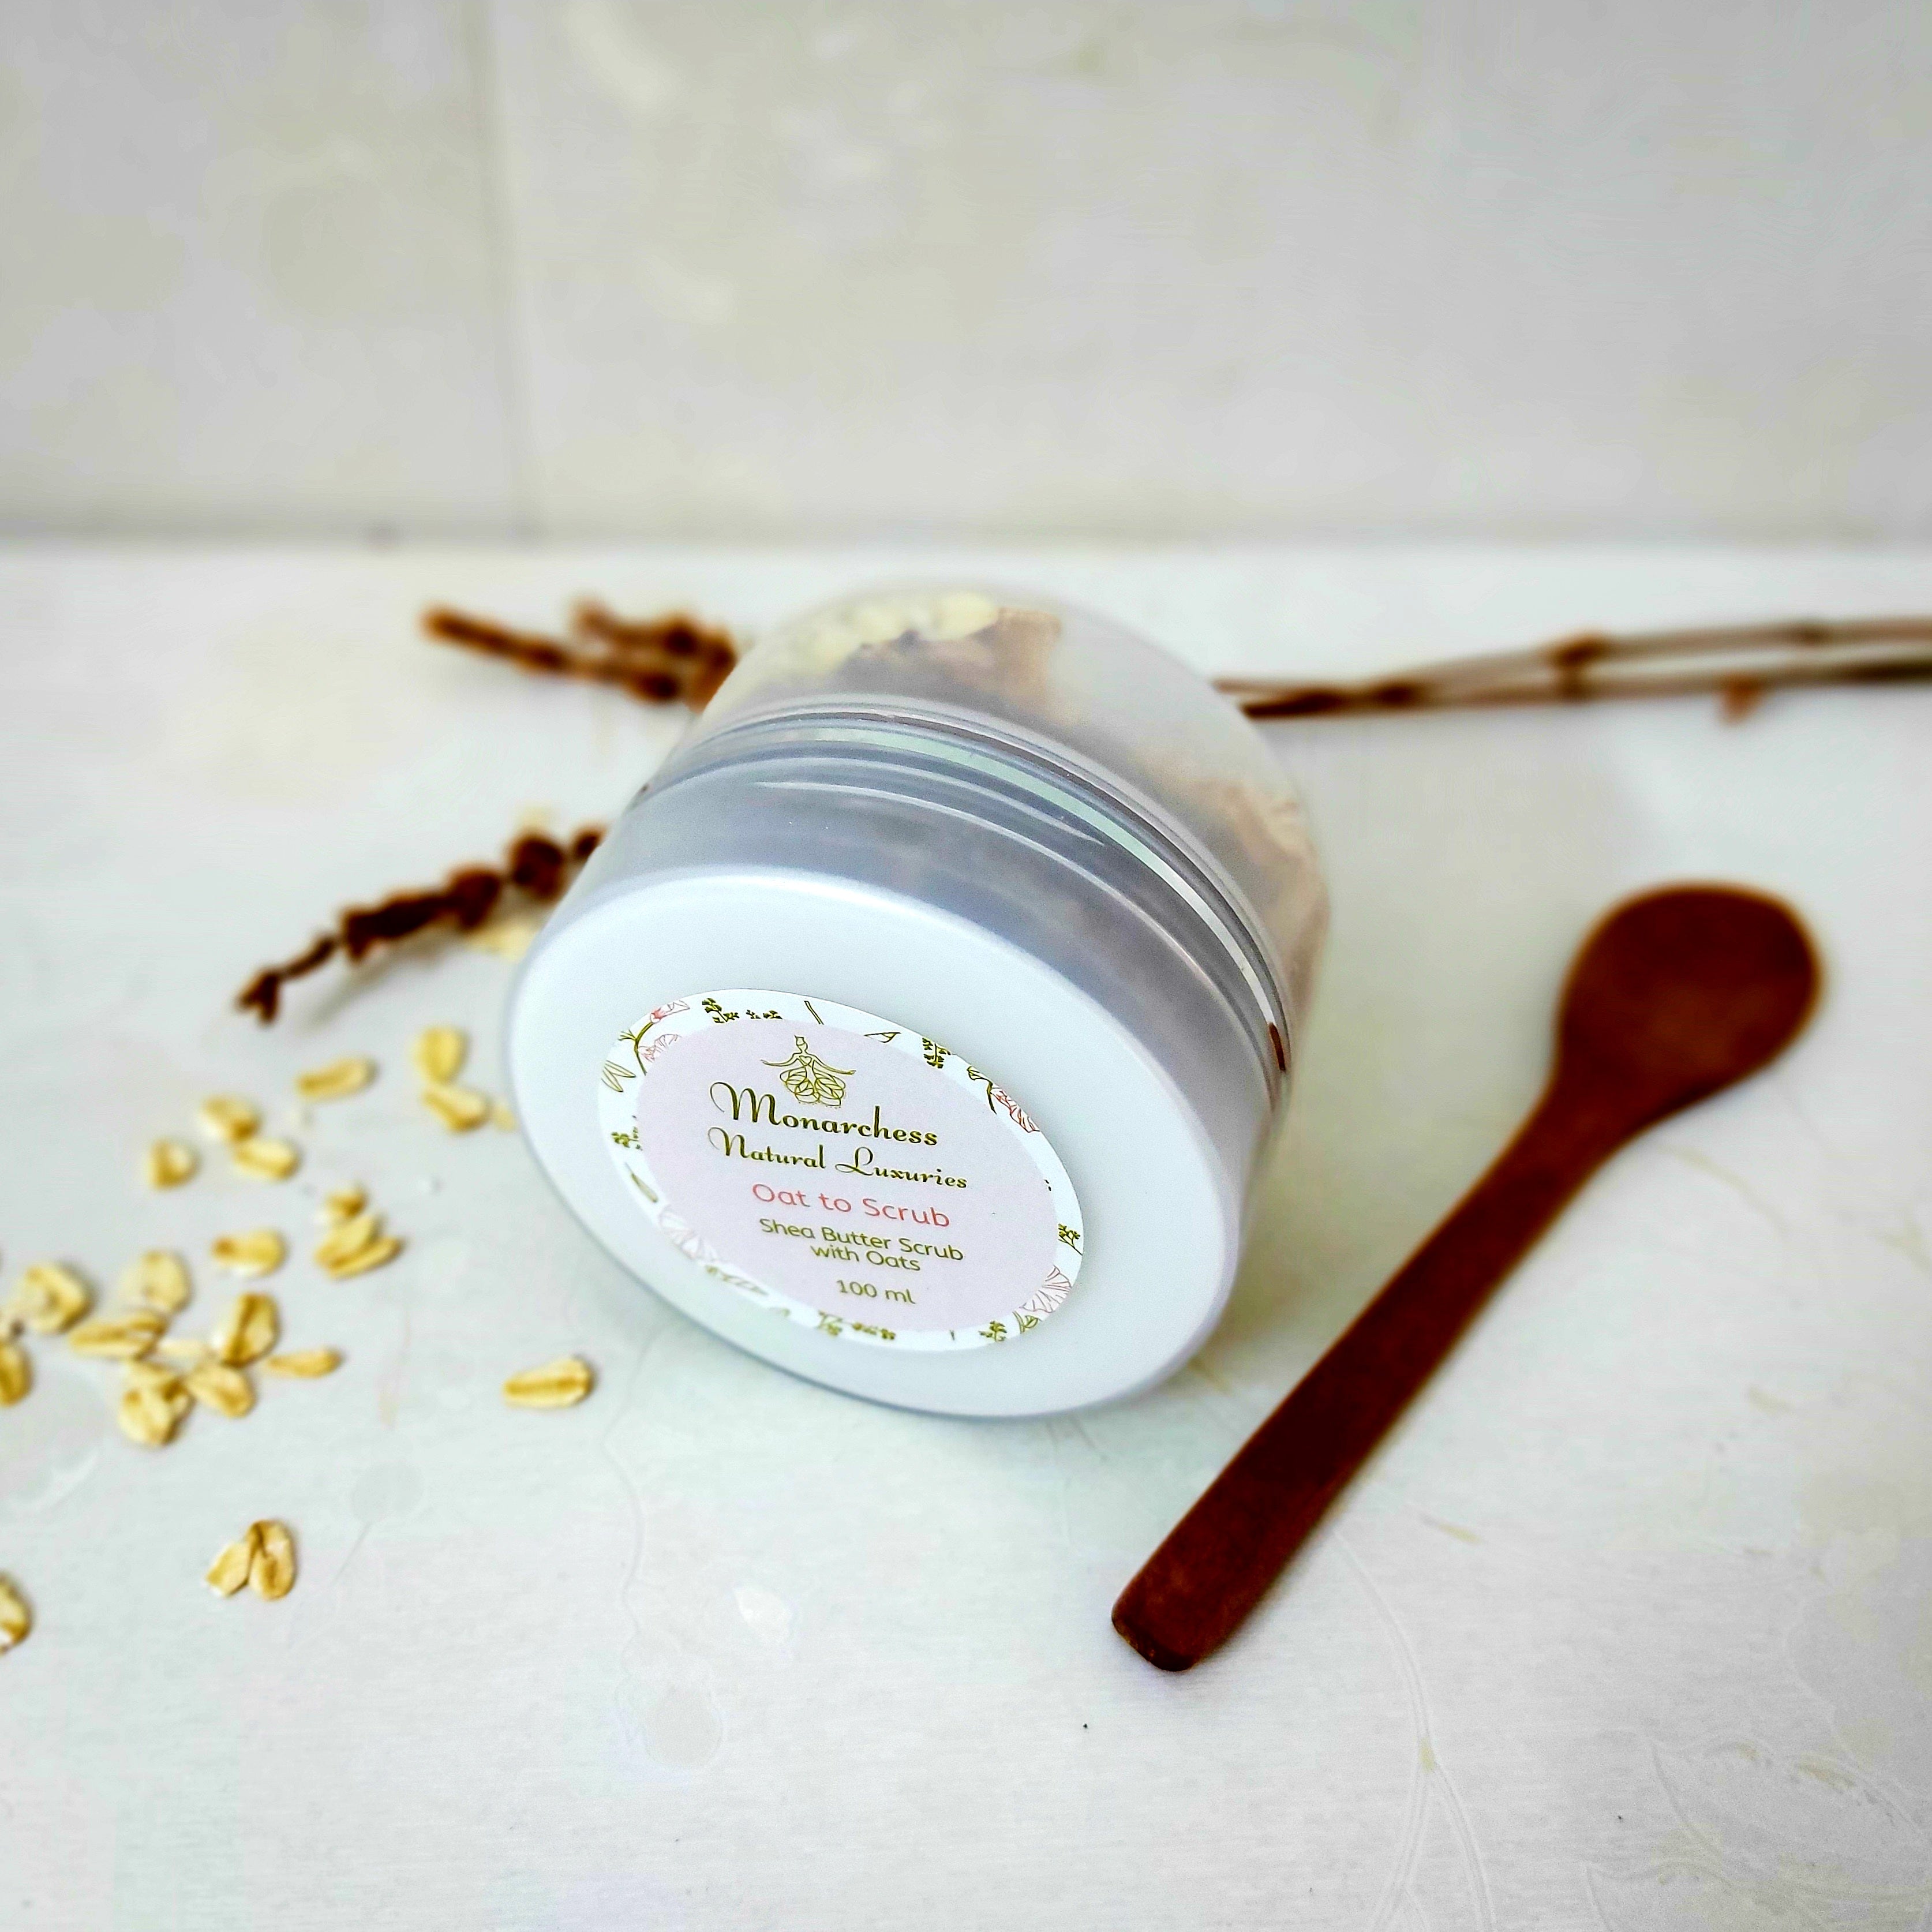 Oat to Scrub. Natural moisturizing scrub with shea butter, coconut oil, and oats. 100 ml. Monarchess Natural Luxuries skin care products. monarchess, Amman, Jordan